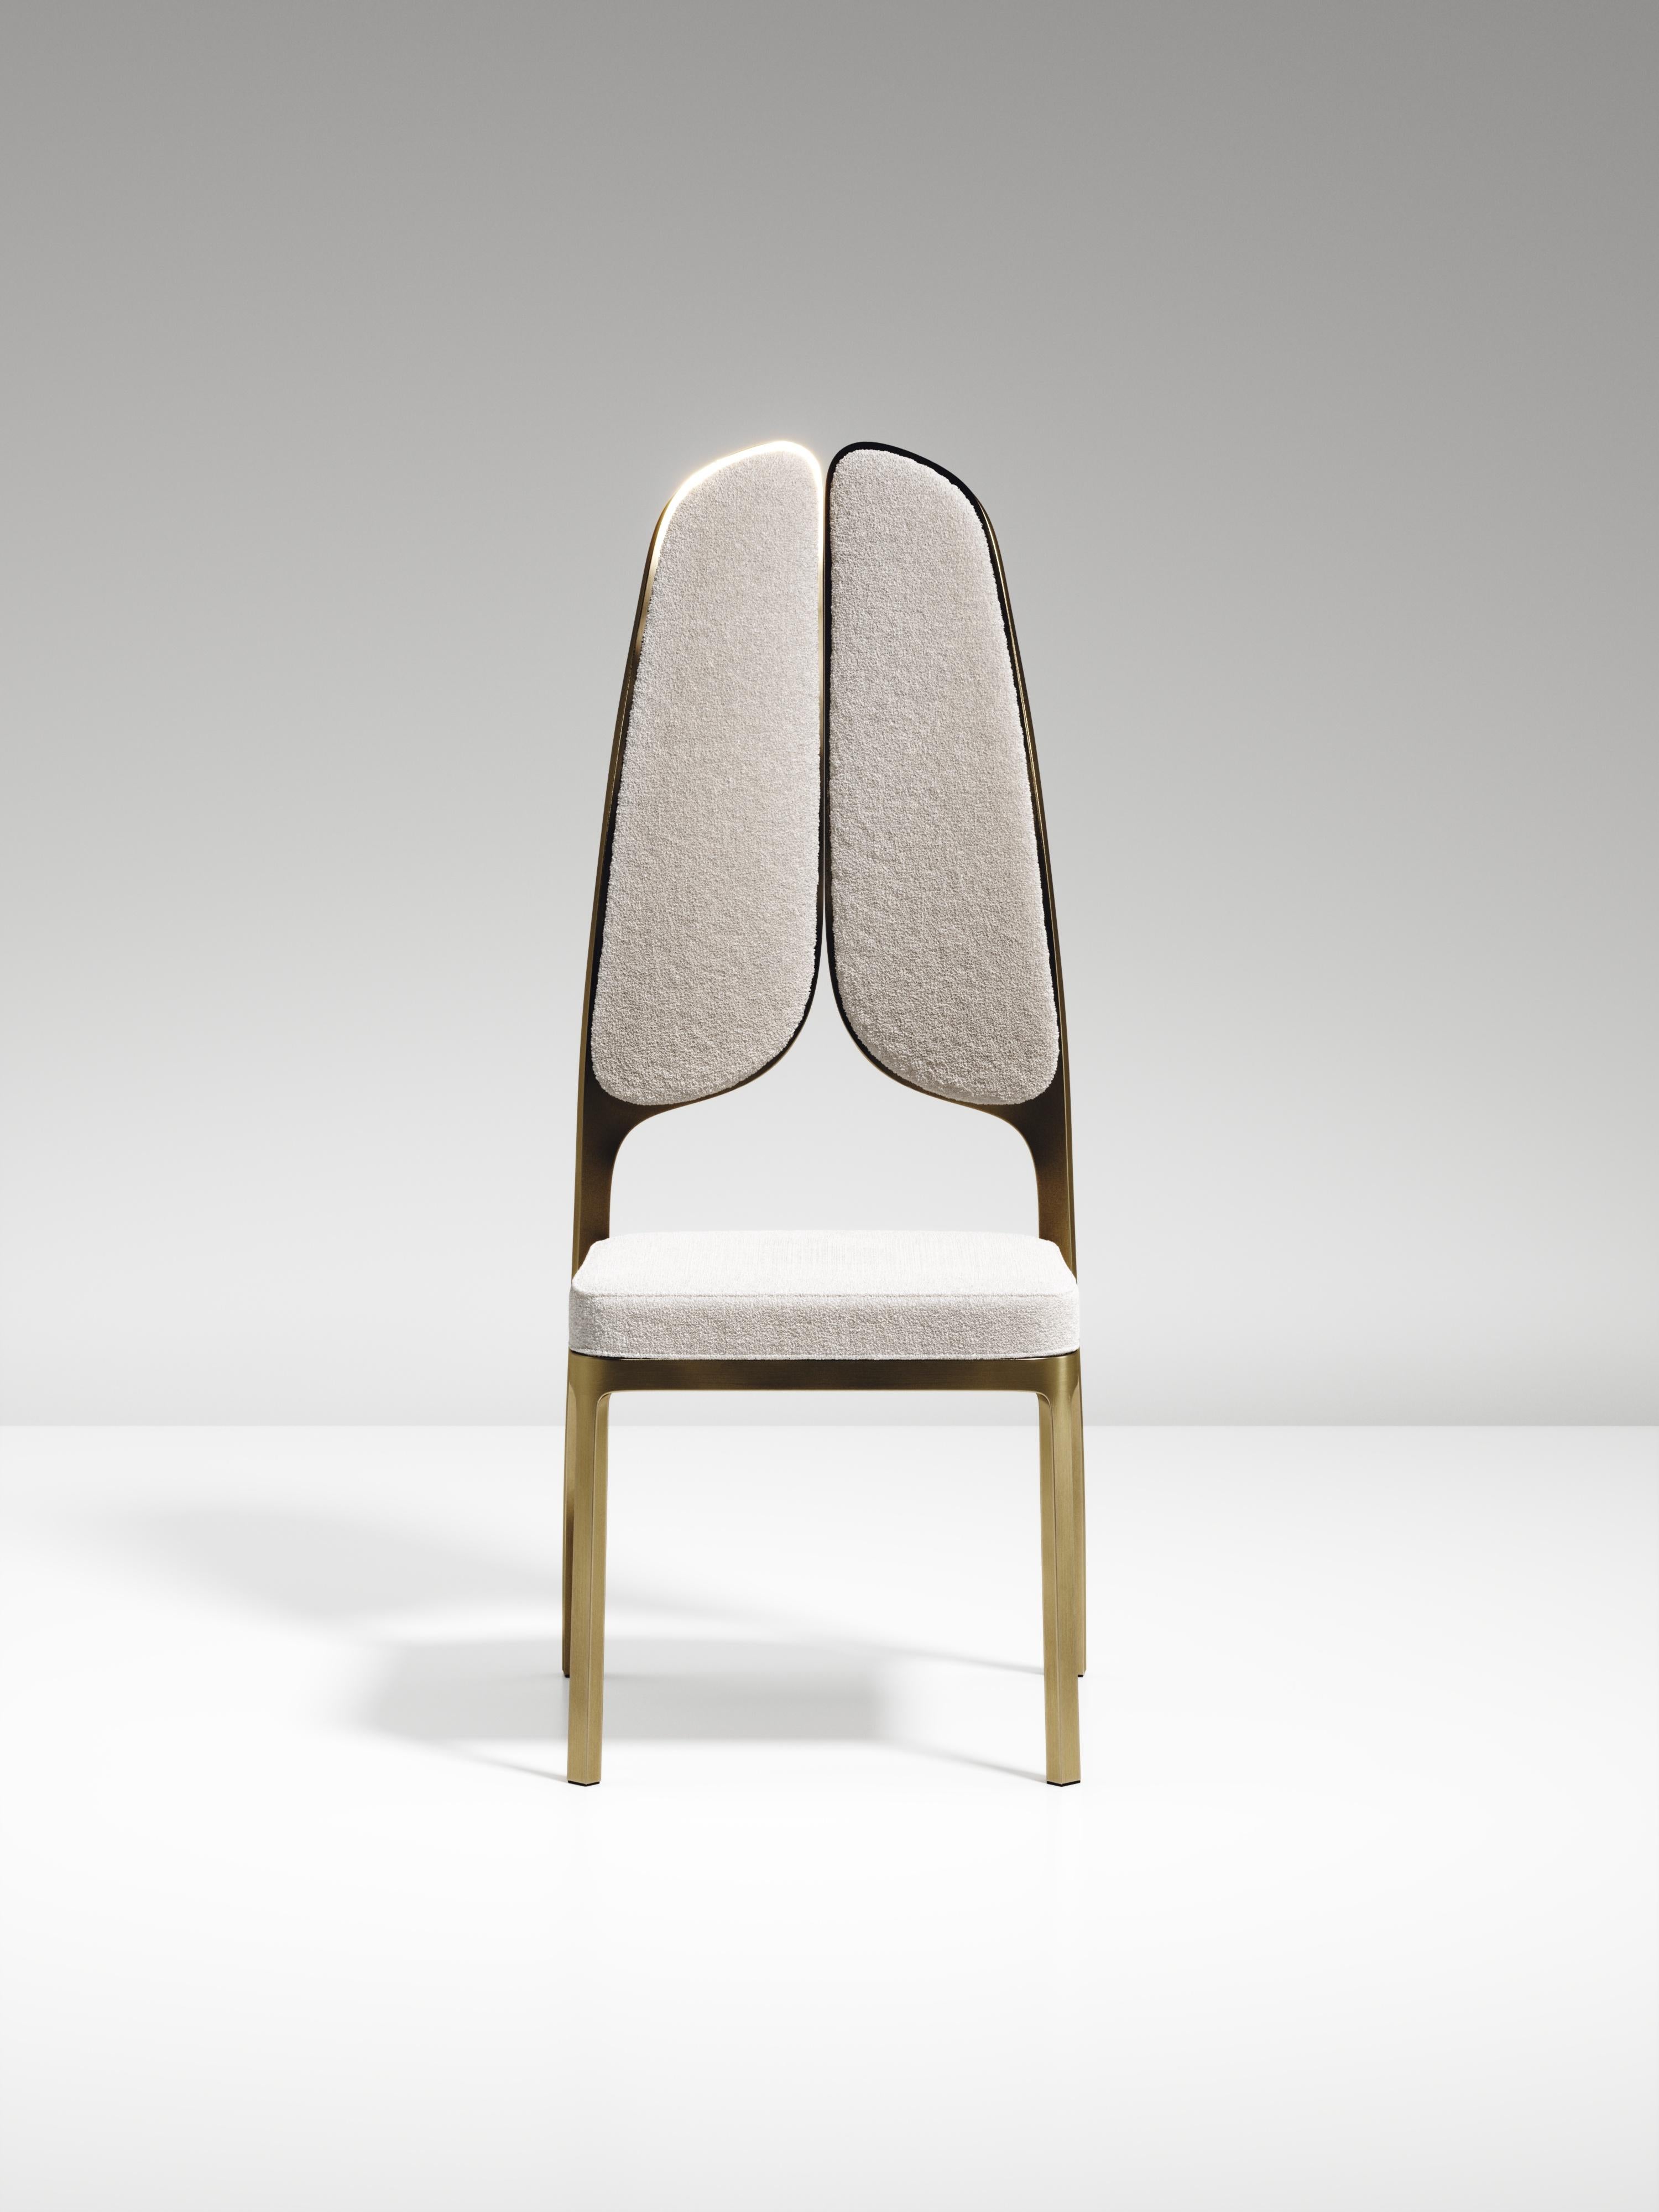 The Gingko dining chair by R & Y Augousti is an elegant and whimsical piece. The cream linen upholstered piece provides comfort while exuding a playful aesthetic in its abstract nod to a butterfly with the form of its backrest. Available in an